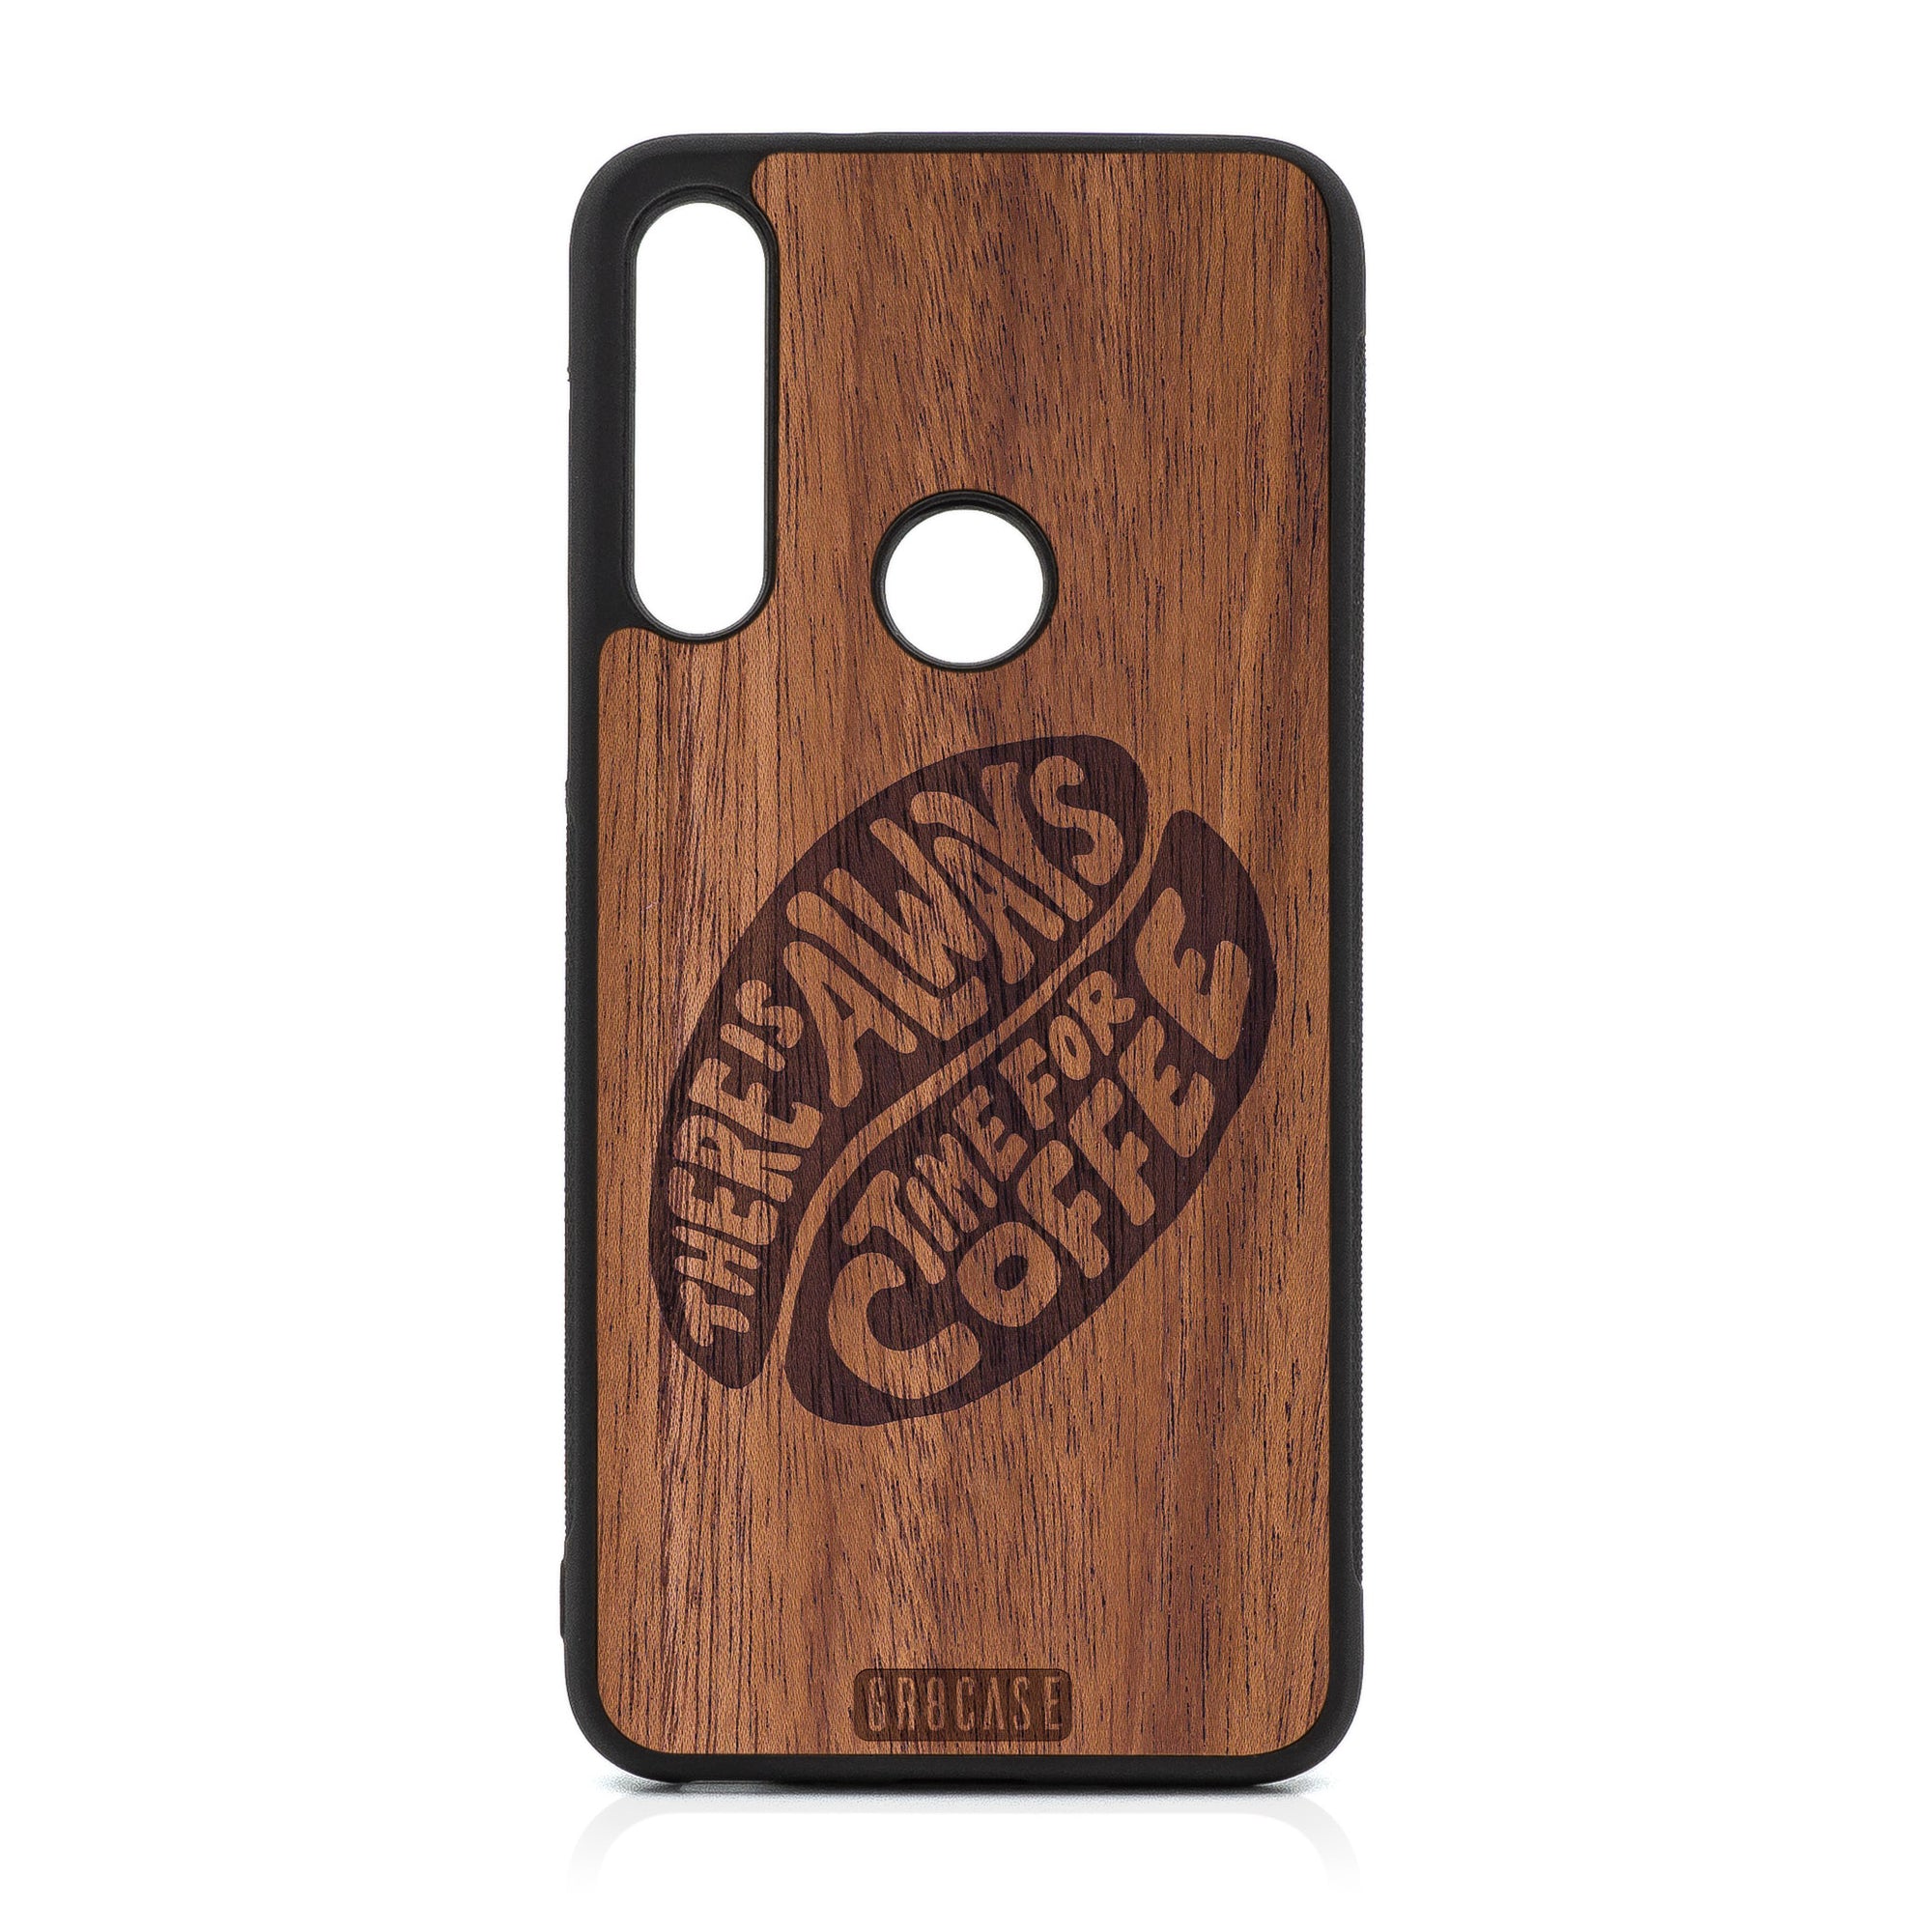 There Is Always Time For Coffee Design Wood Case For Moto G Fast